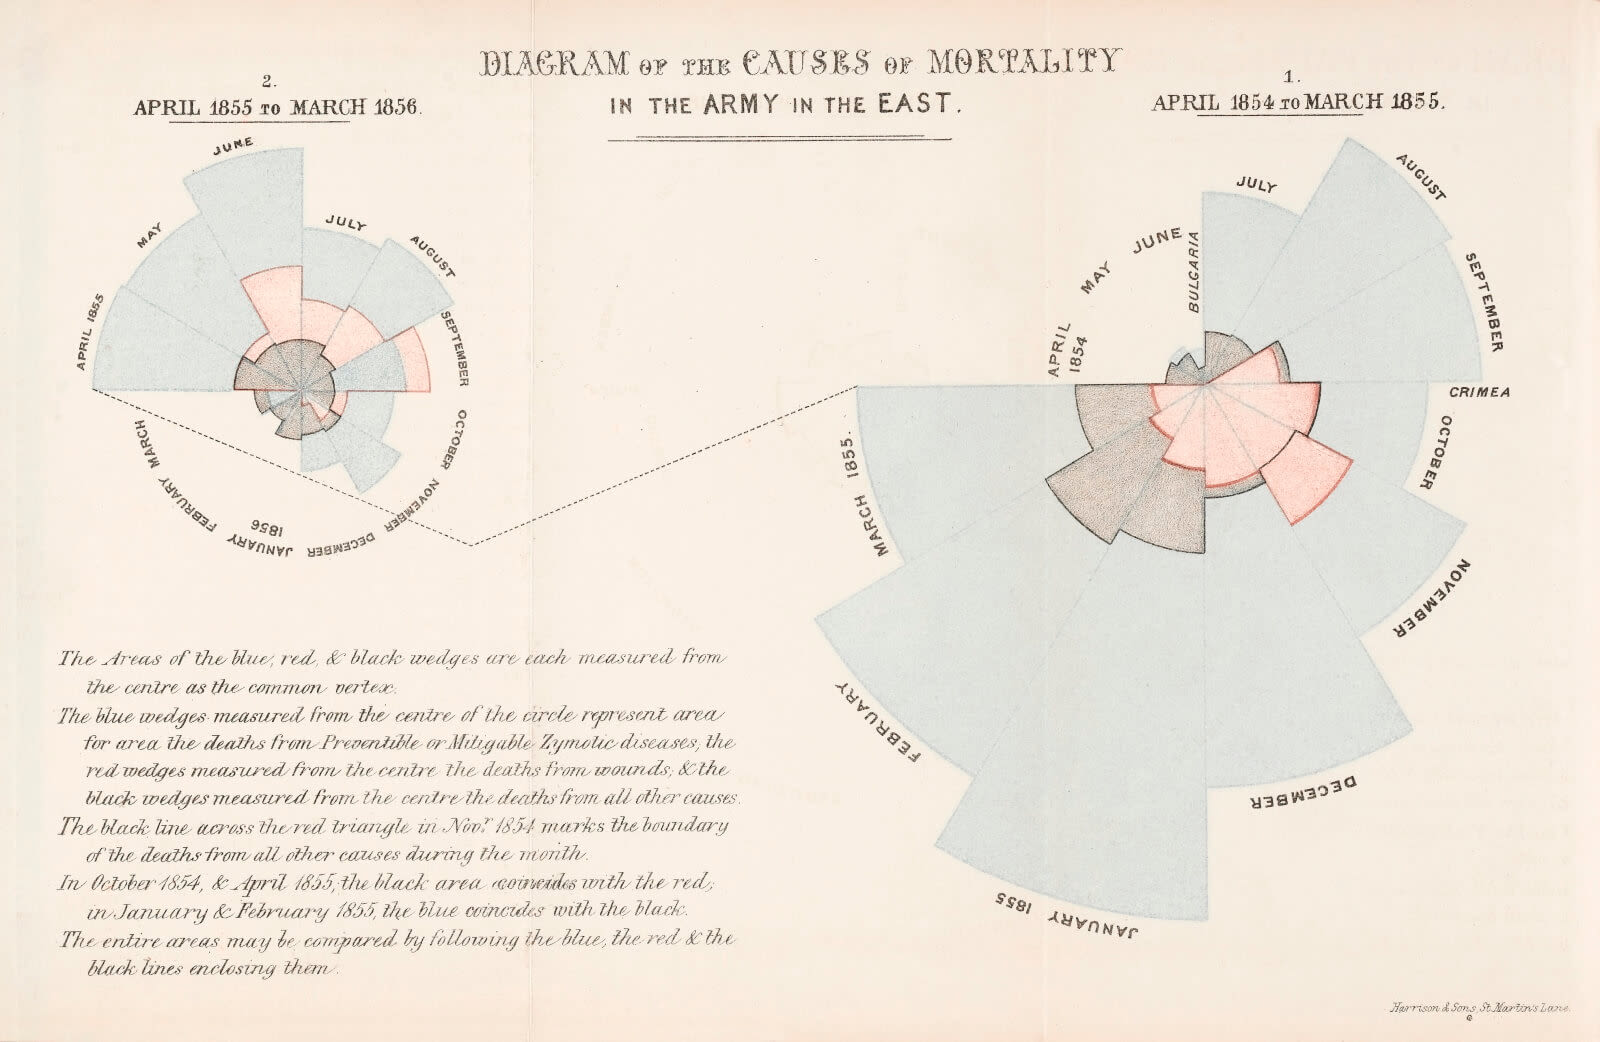 Florence Nightingale's Diagram of causes of mortality in the army